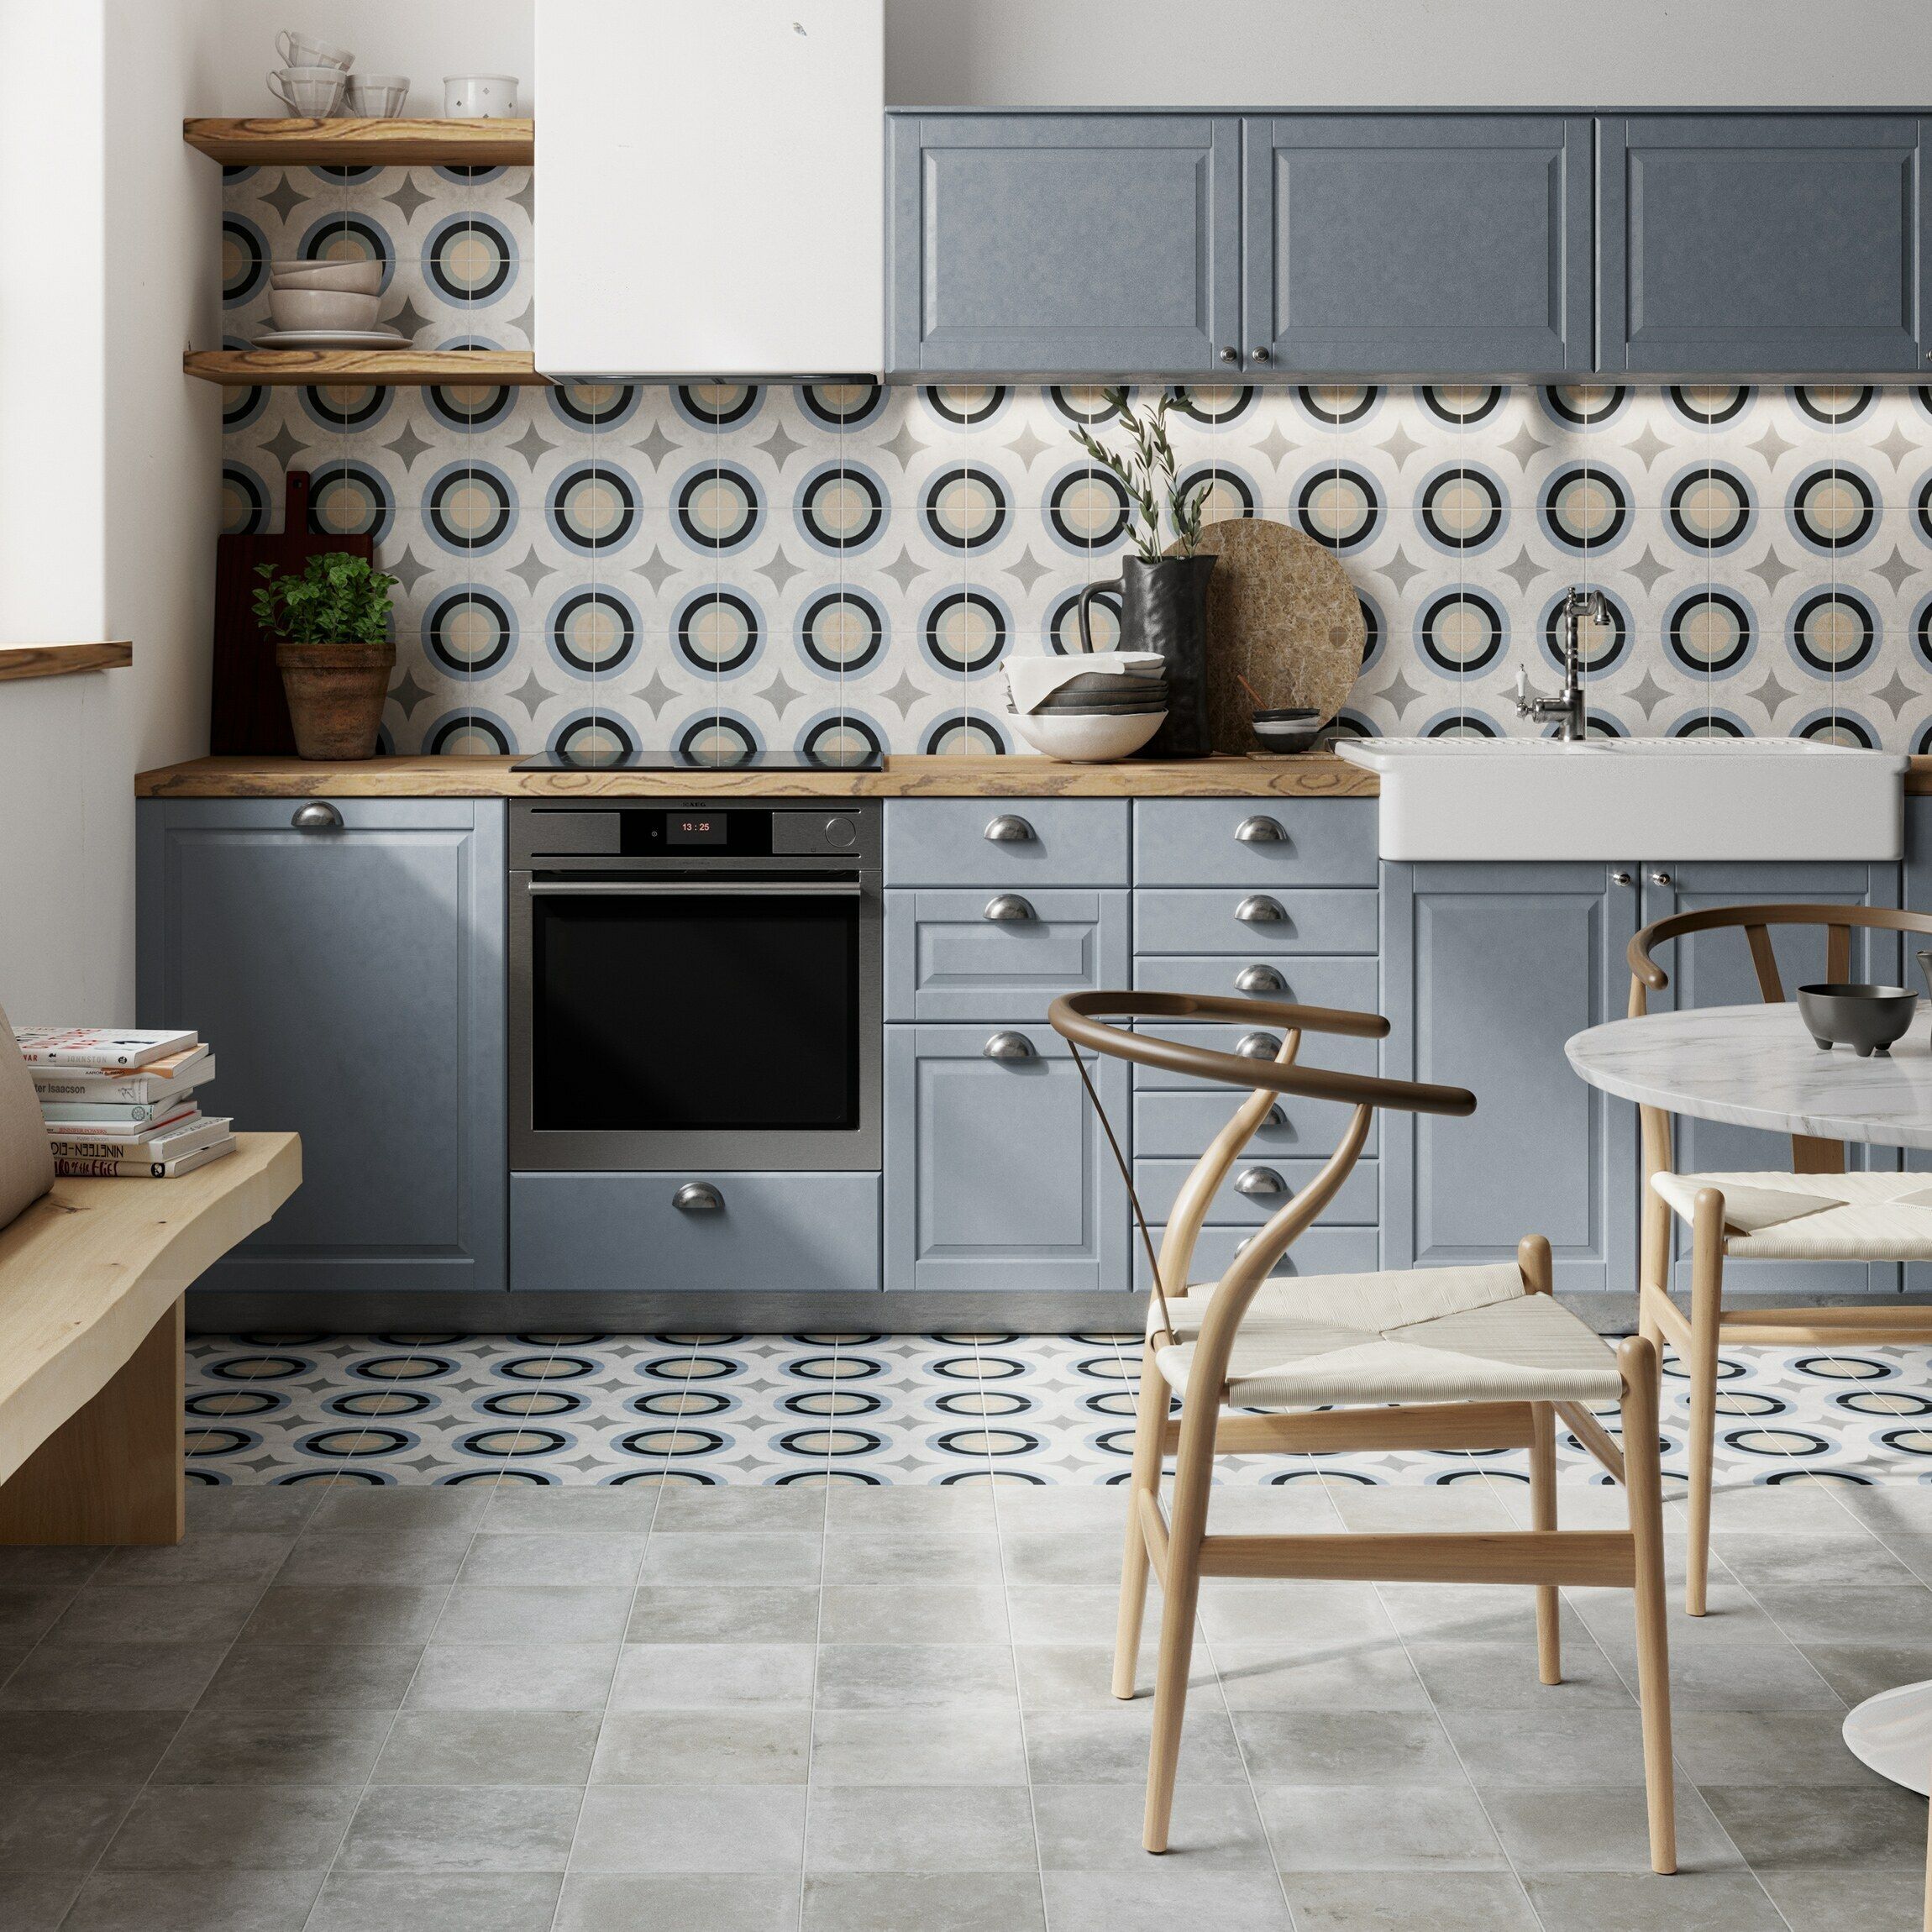 Swing Decor Blue Geometric Wall And, Blue And White Kitchen Floor Tiles